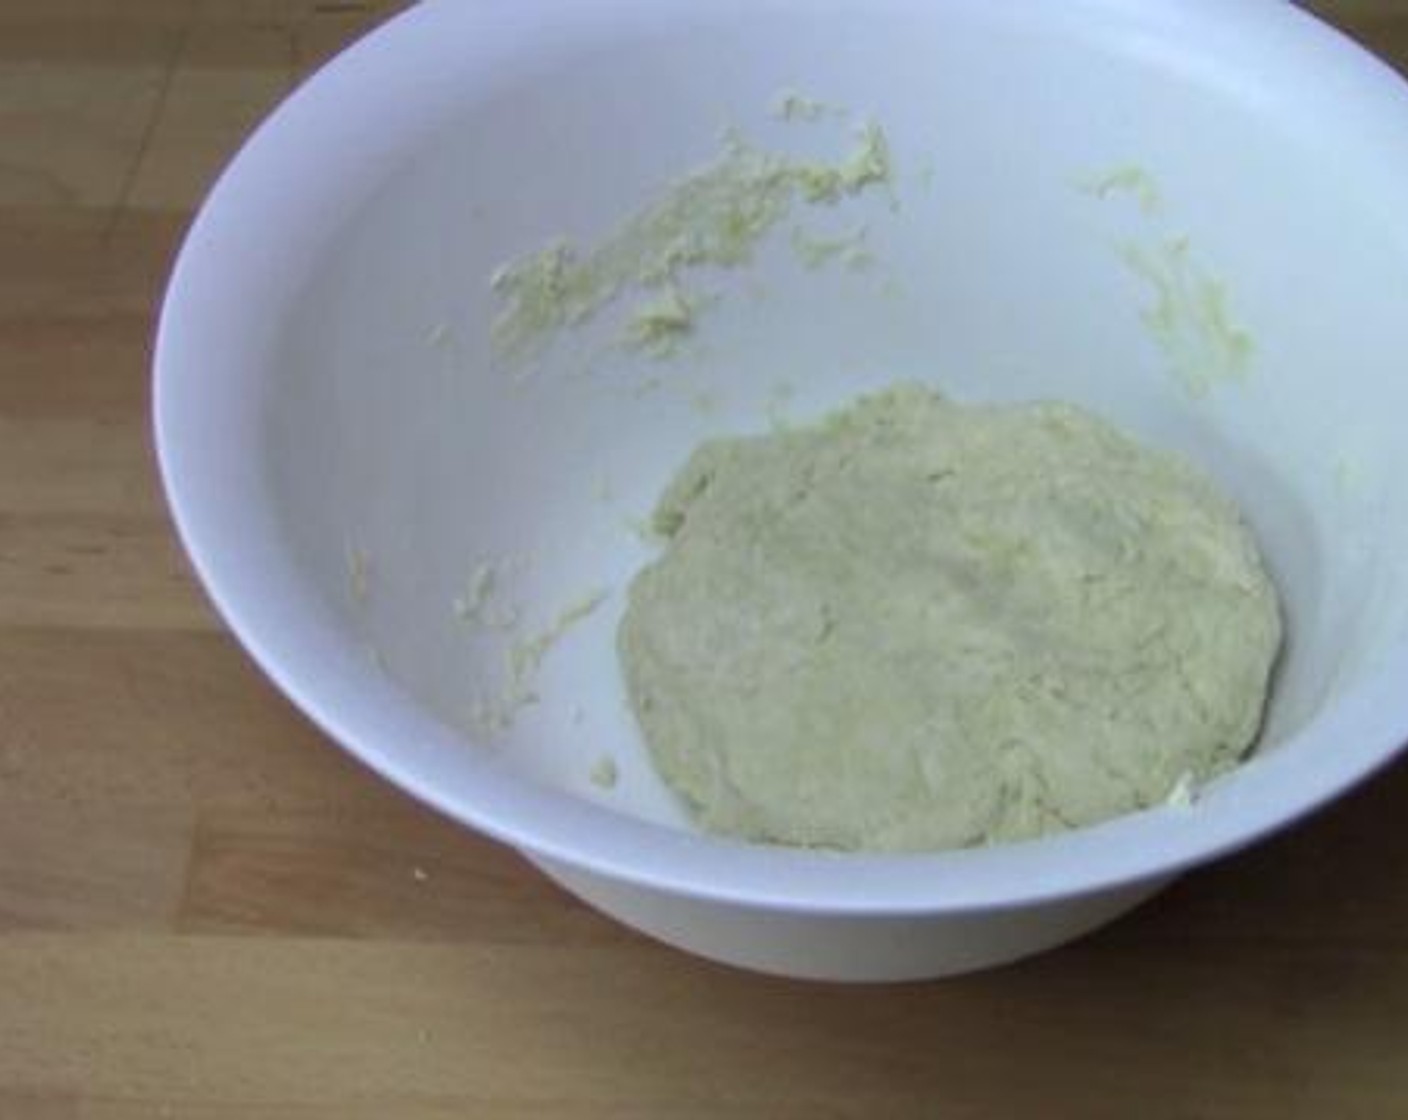 step 1 Into a mixing bowl, mix together the All-Purpose Flour (4 cups), Salt (1 tsp), Instant Dry Yeast (1/2 Tbsp), Olive Oil (1/4 cup), and Water (1 cup) until a nice and smooth dough forms.